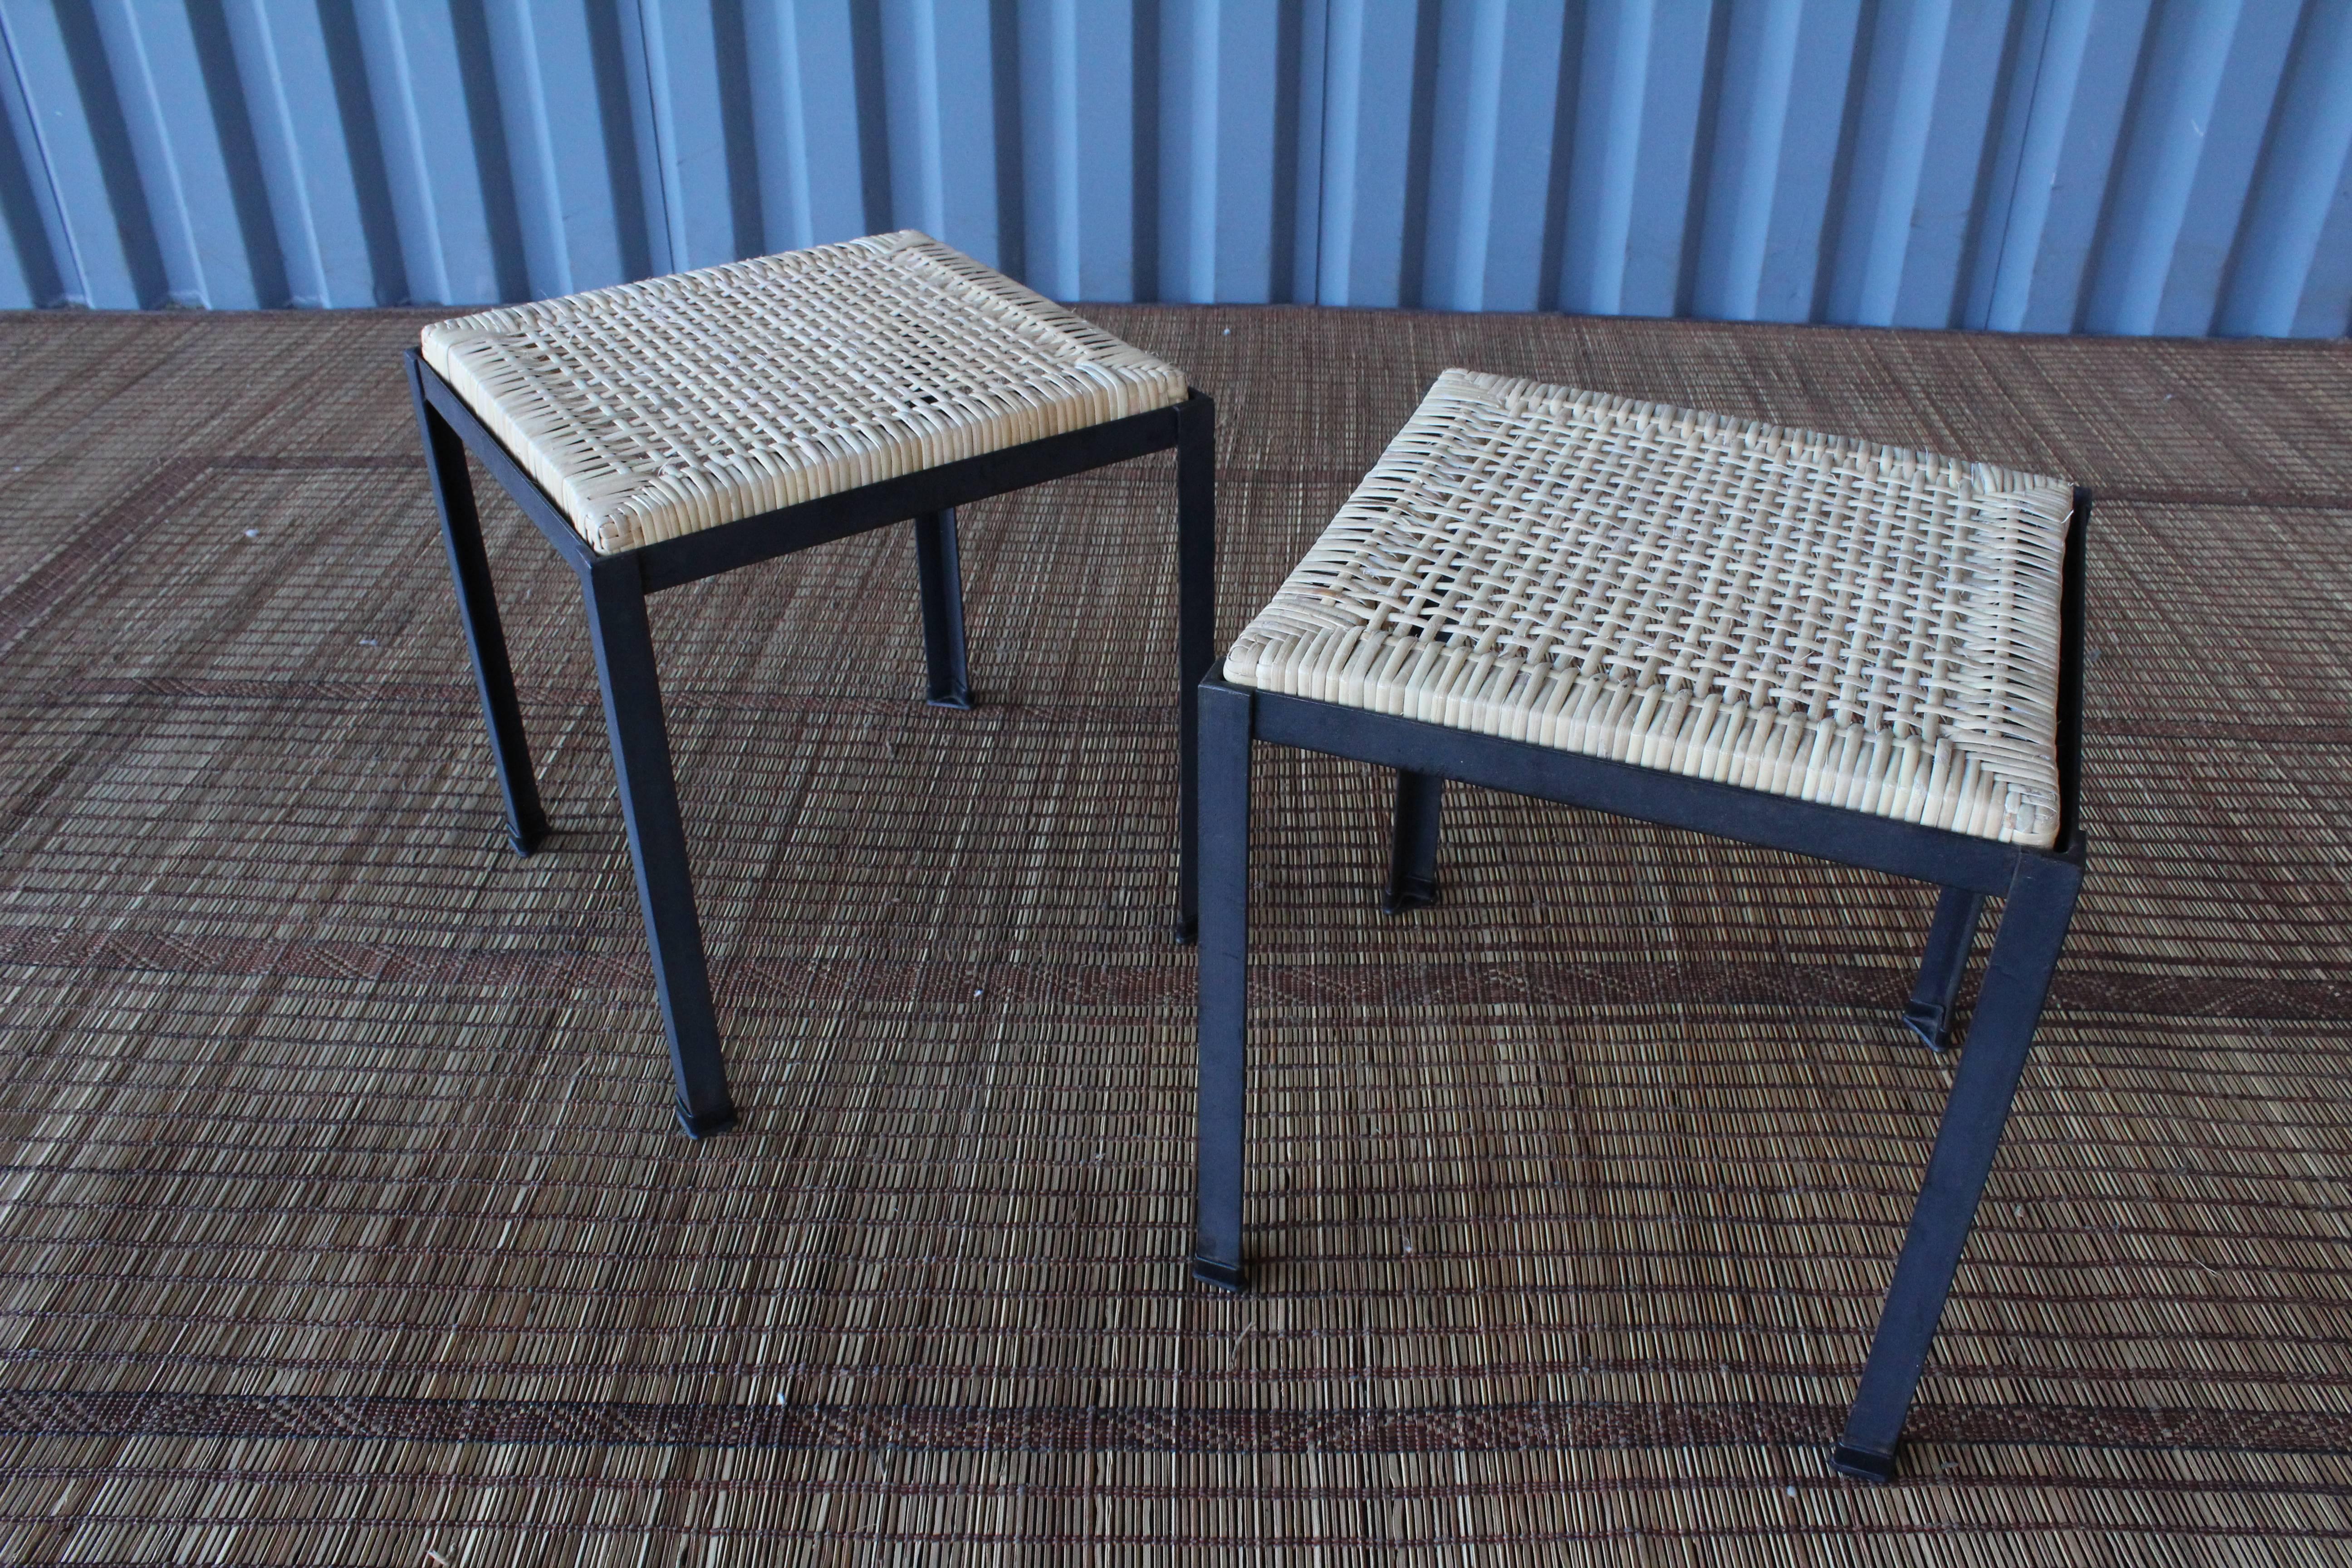 American Pair of Stools by Danny Ho Fong for Tropi-Cal